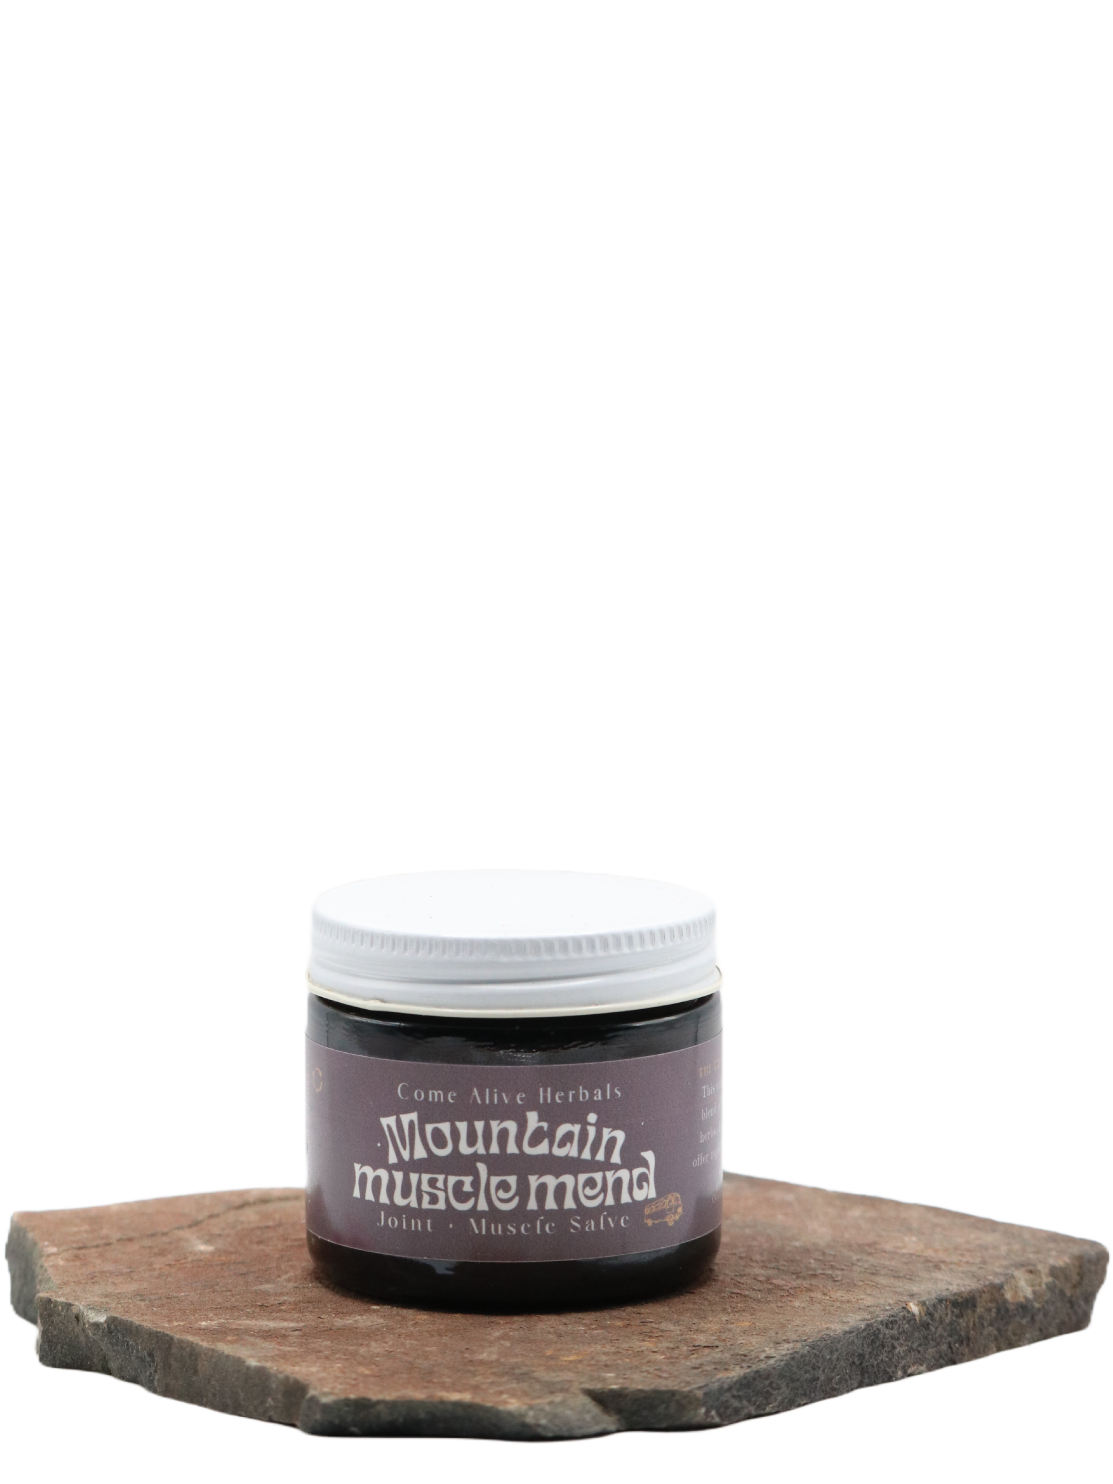  Mountain Muscle Mend by Come Alive Herbals Come Alive Herbals Perfumarie